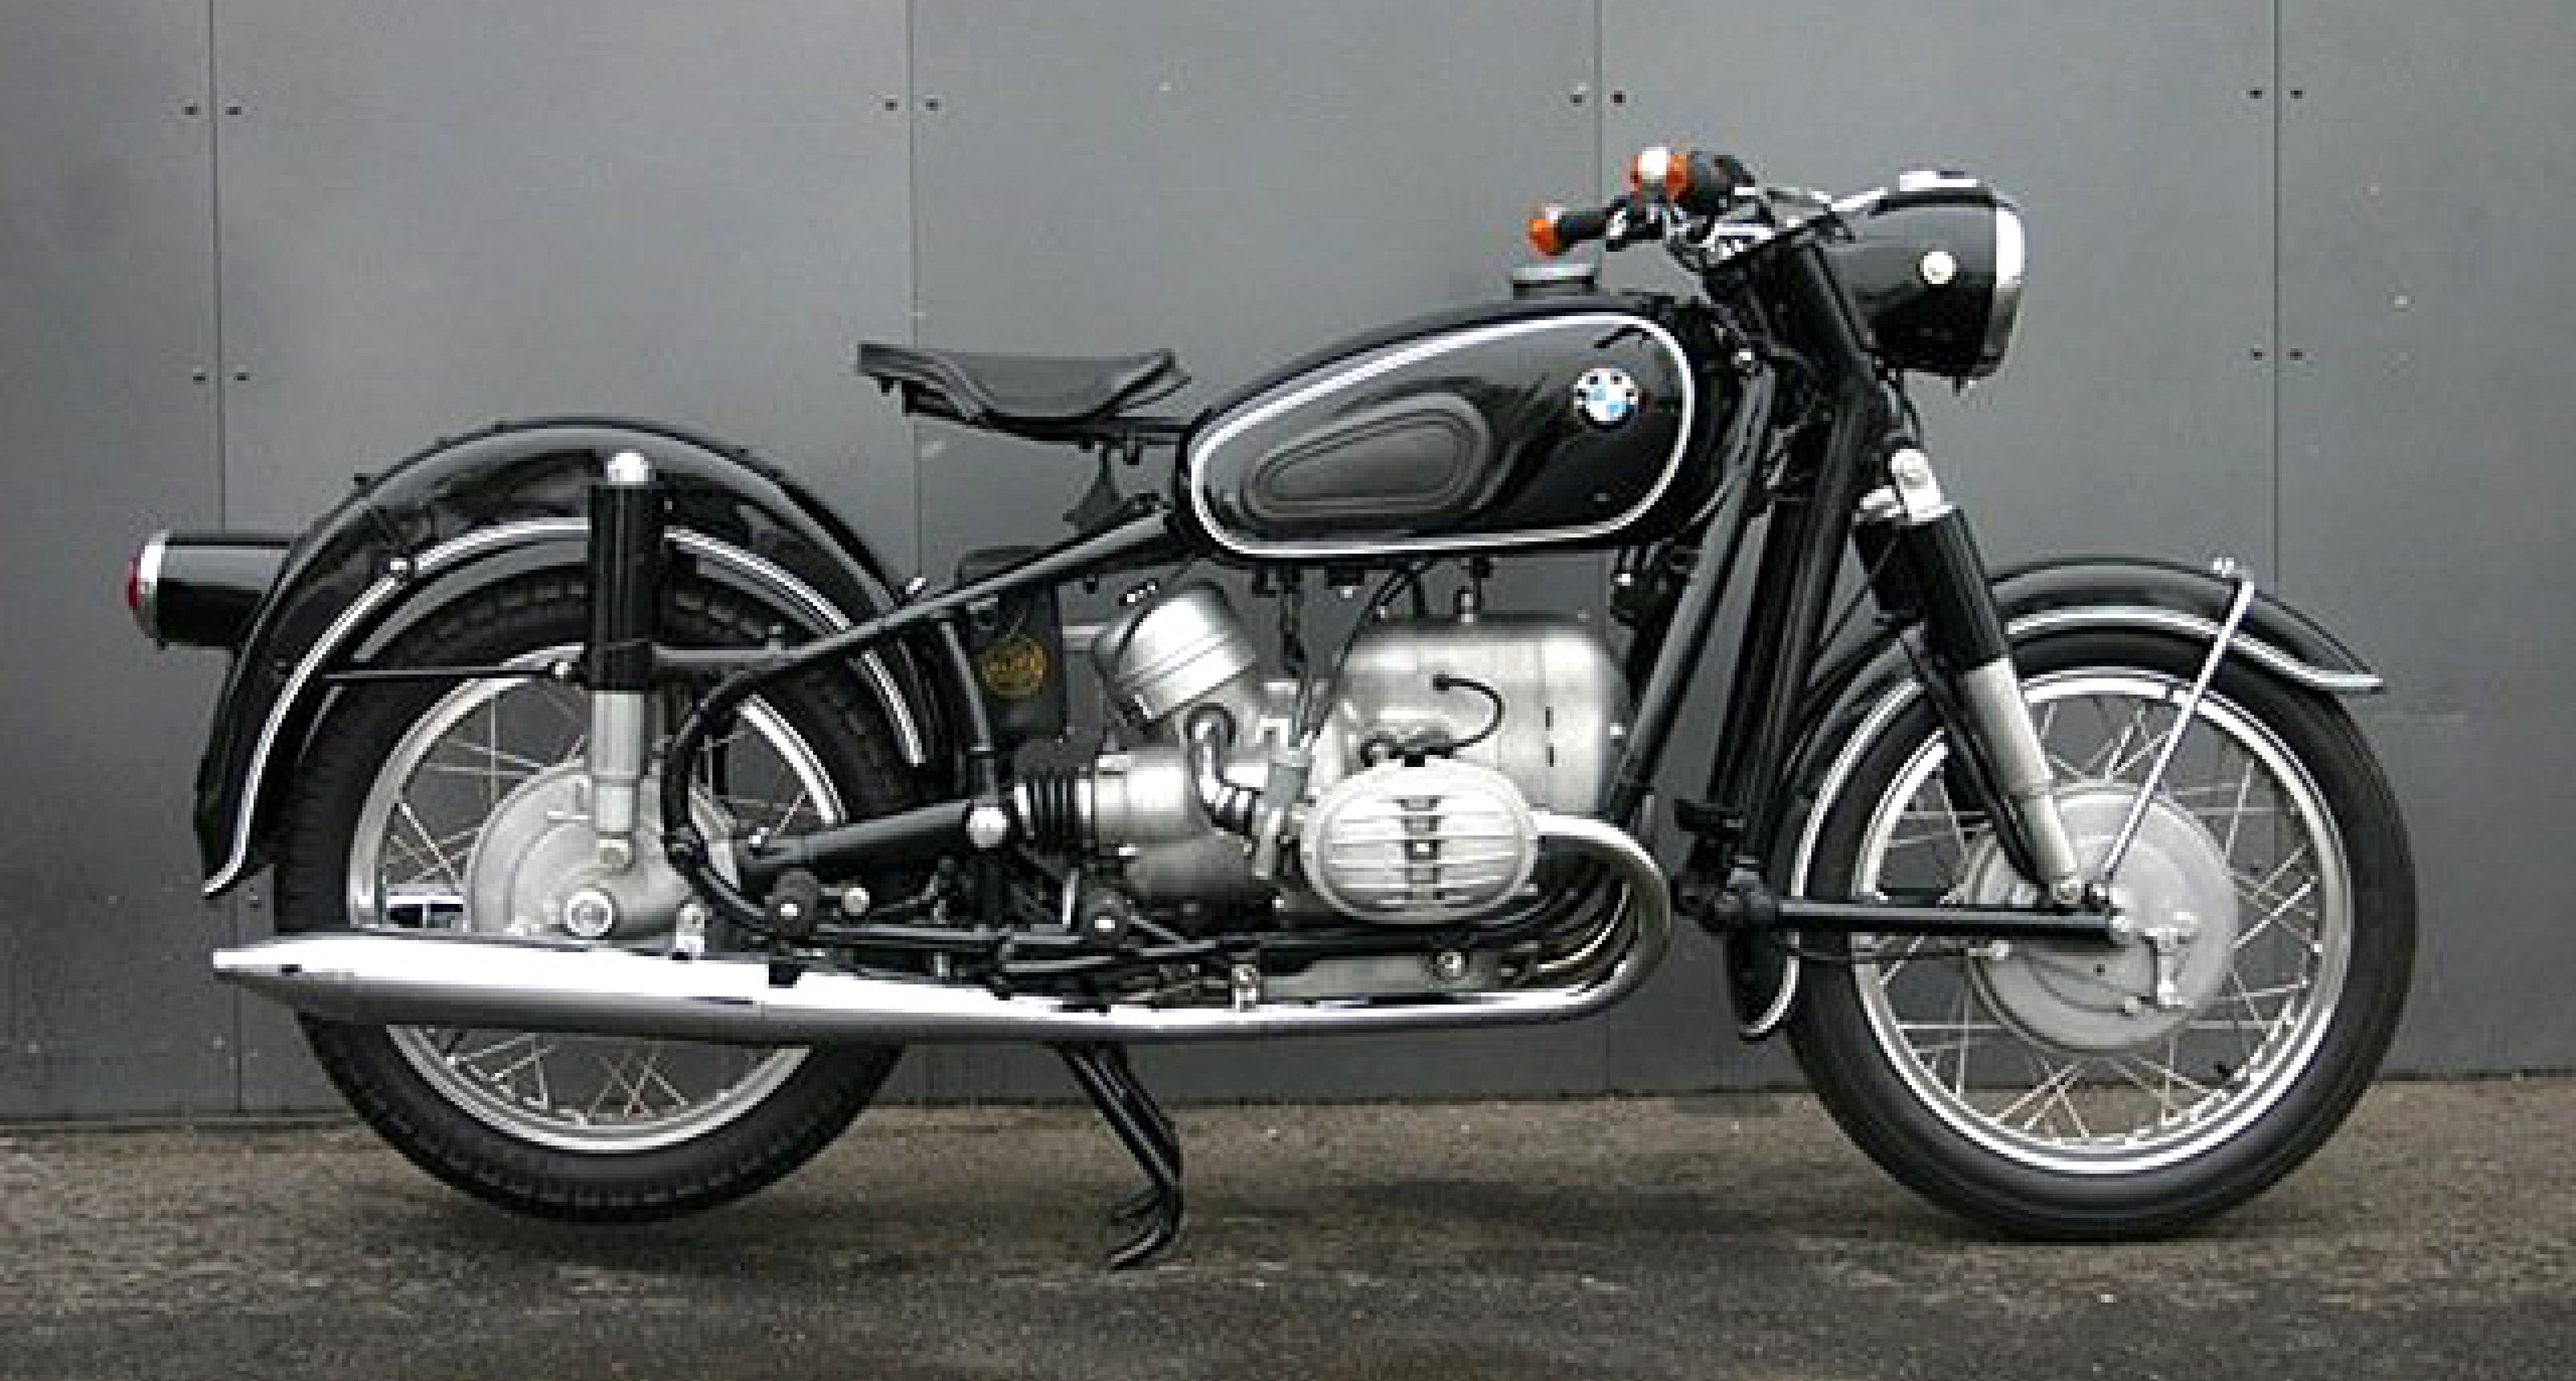 old bmw motorcycles for sale